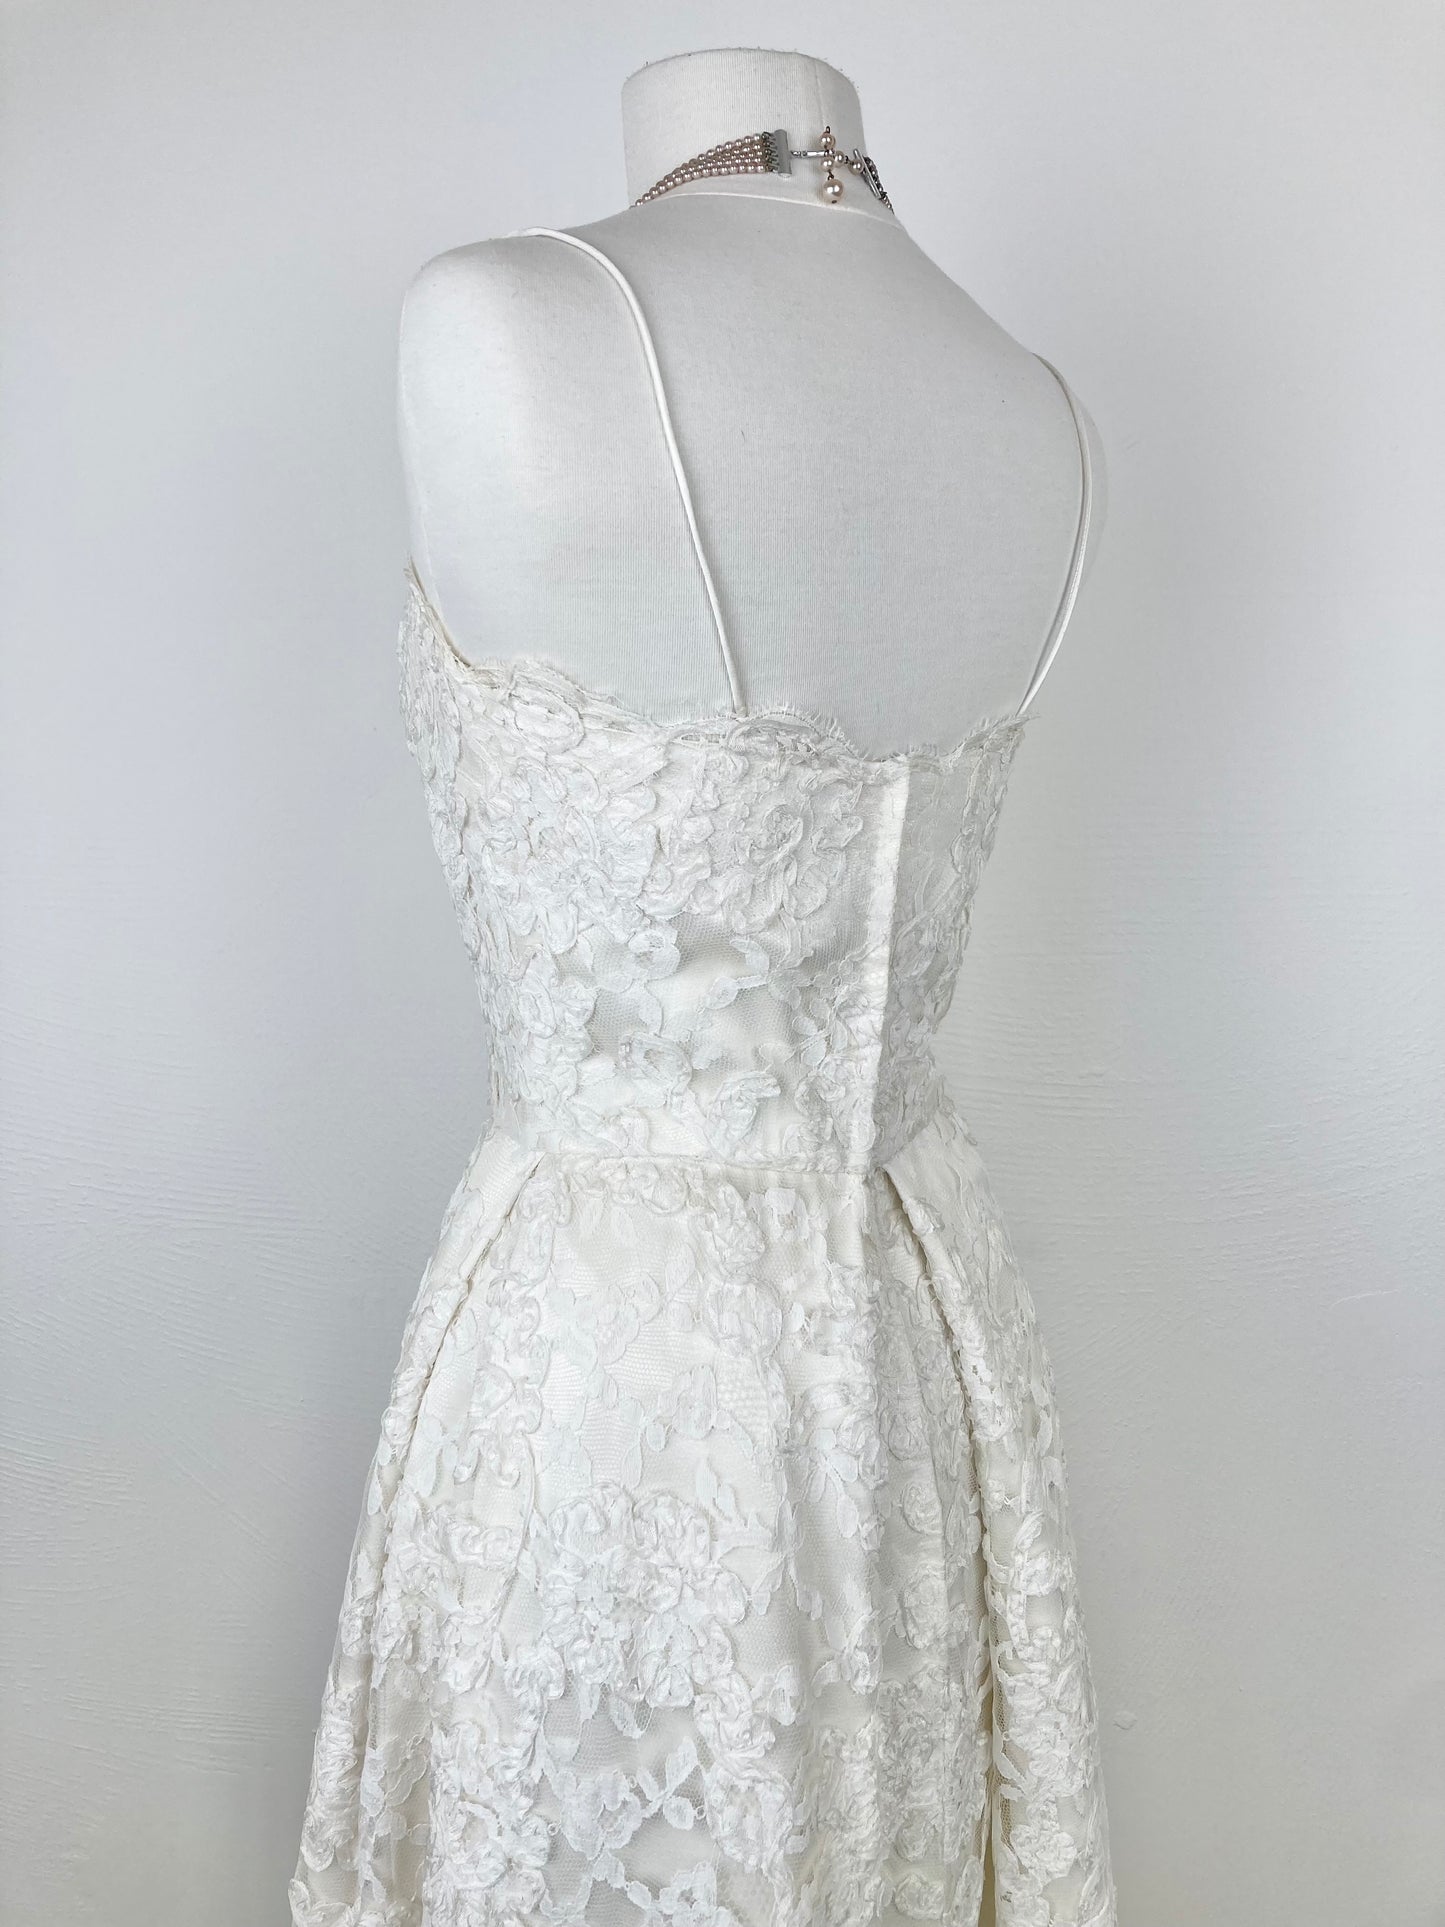 1960s Designer White Silk and Lace Gown by Mr. Gilbert, Silk and Lace Wedding Gown, Vintage Bridal Gown, Vintage Designer Gown